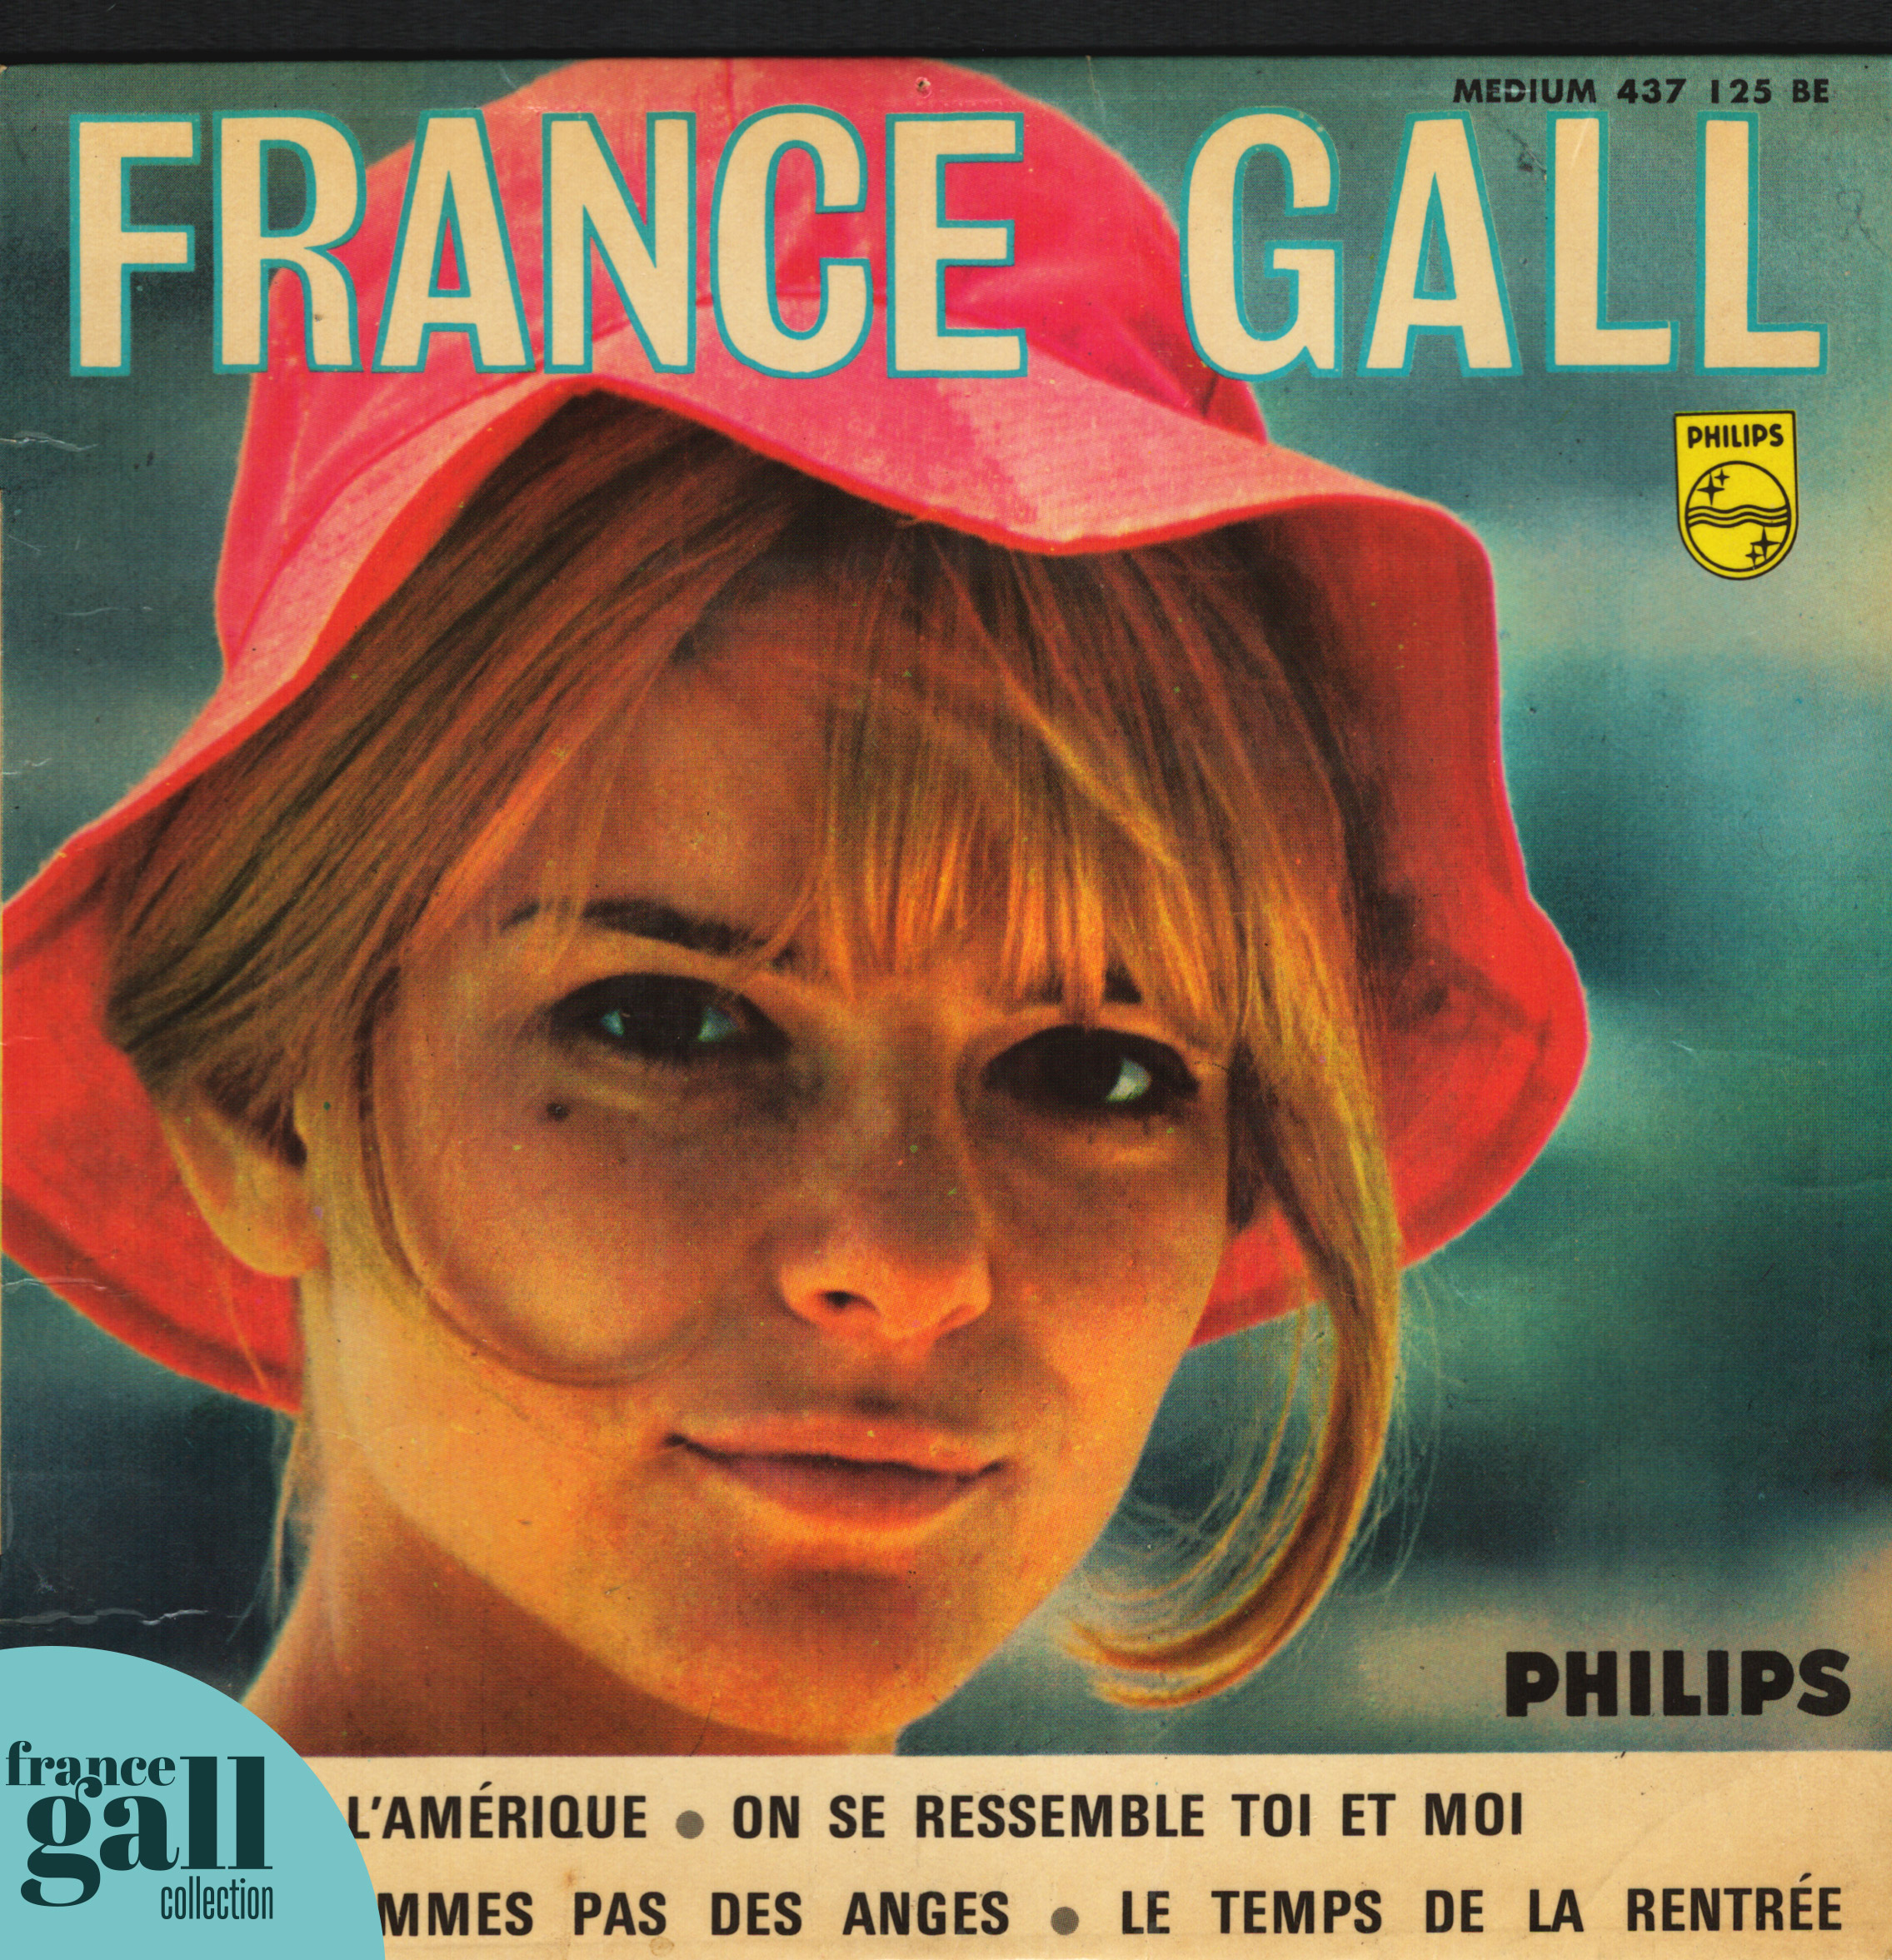 French calling. Франс Галль 1965. Baby Pop Франс Галль. Laisse tomber les filles Франс Галль. France Gall Cover LP.